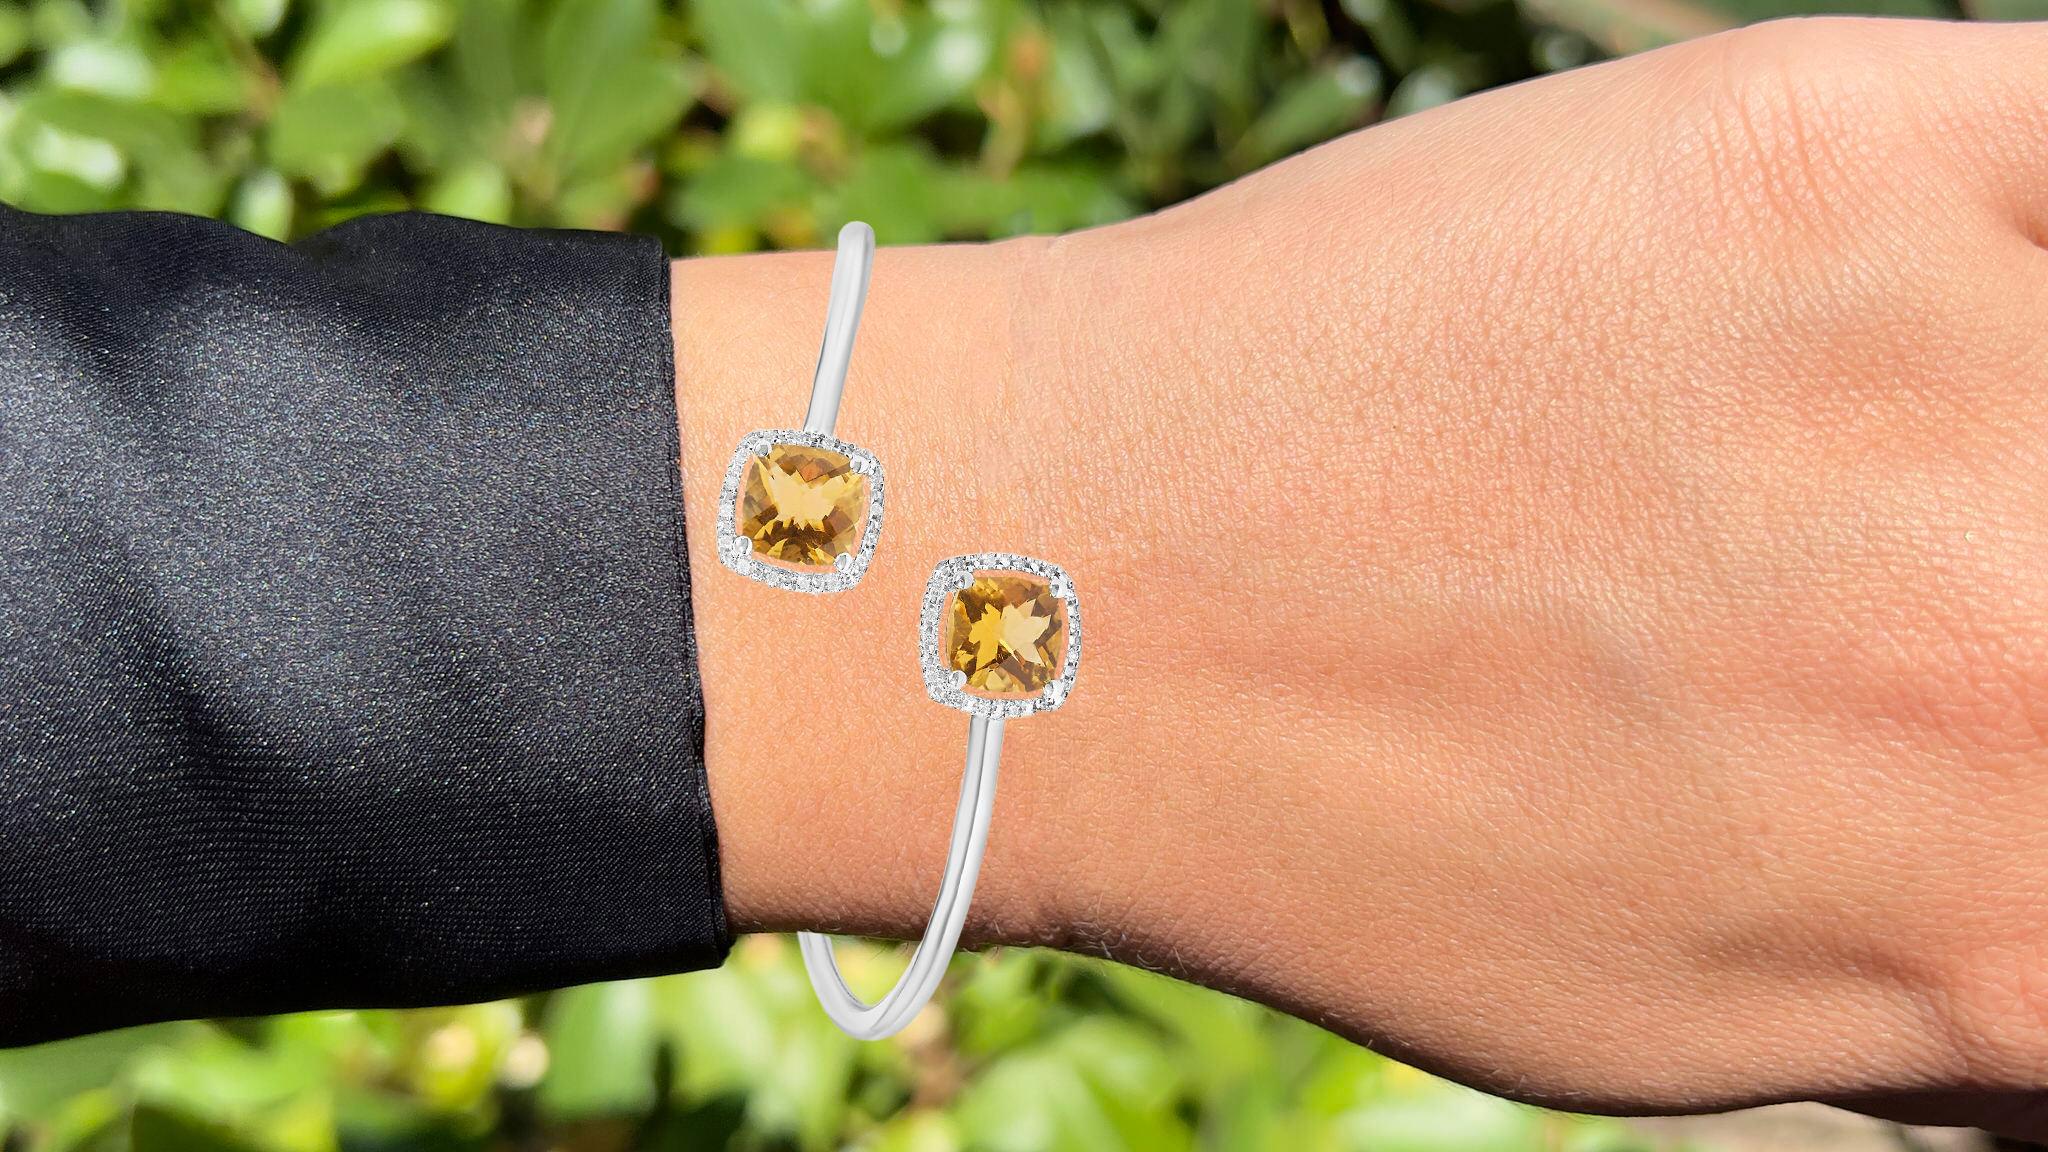 It comes with the Gemological Appraisal by GIA GG/AJP
All Gemstones are Natural in Origin
Citrines, Diamonds
Metal: Sterling Silver
Bracelet Length: 7 Inches
*It fits wrists up to 7.75 inches